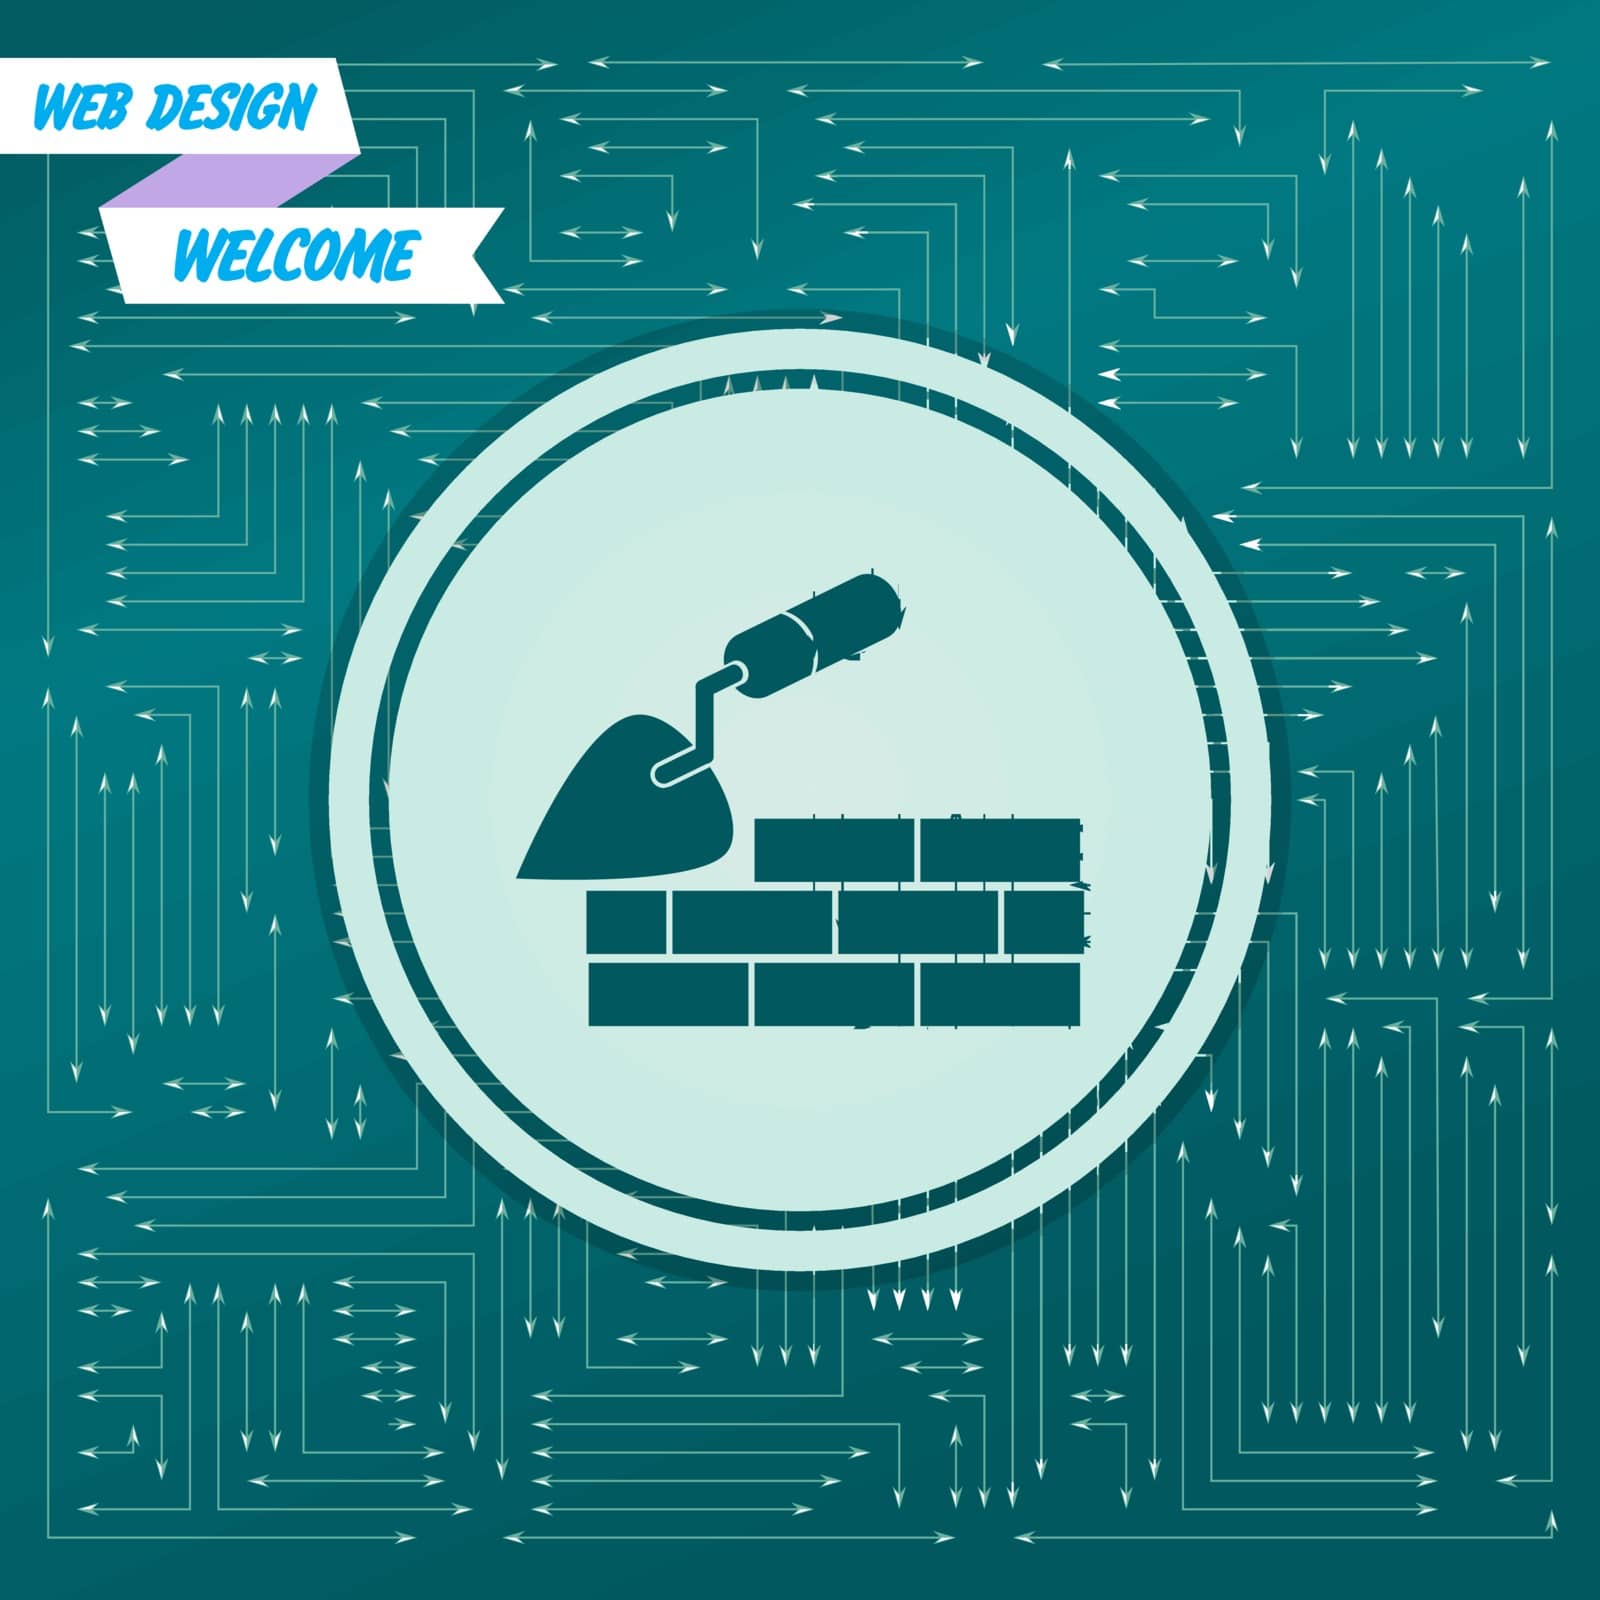 Trowel building and brick wall icon on a green background, with arrows in different directions. It appears on the electronic board. Vector by Adamchuk